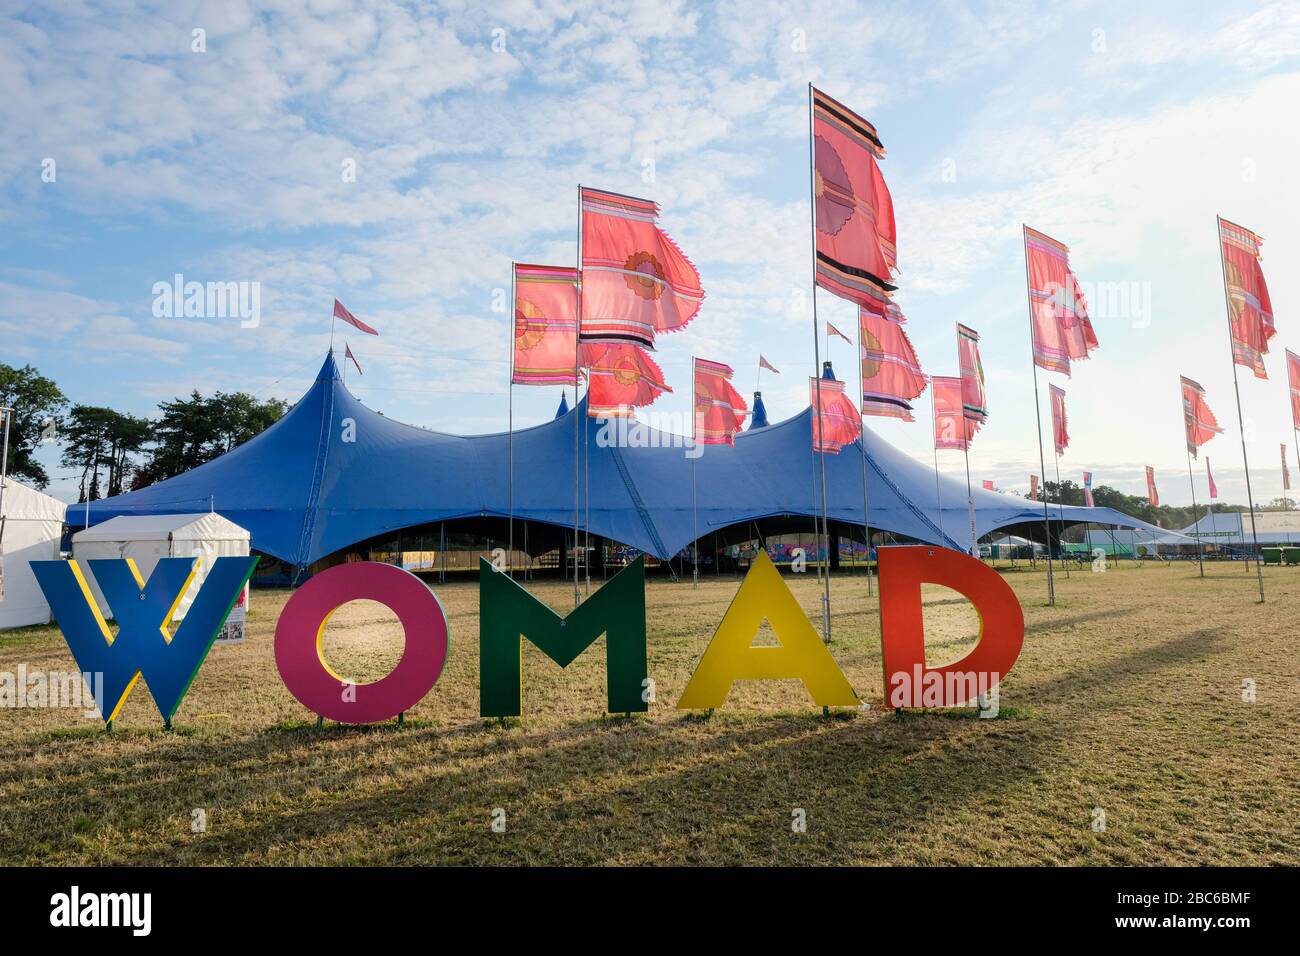 Multicoloured WOMAD sign, (World of Music and Dance) outside the Siam tent at the festival site, Charlton Park, UK. July 28, 2019 Stock Photo